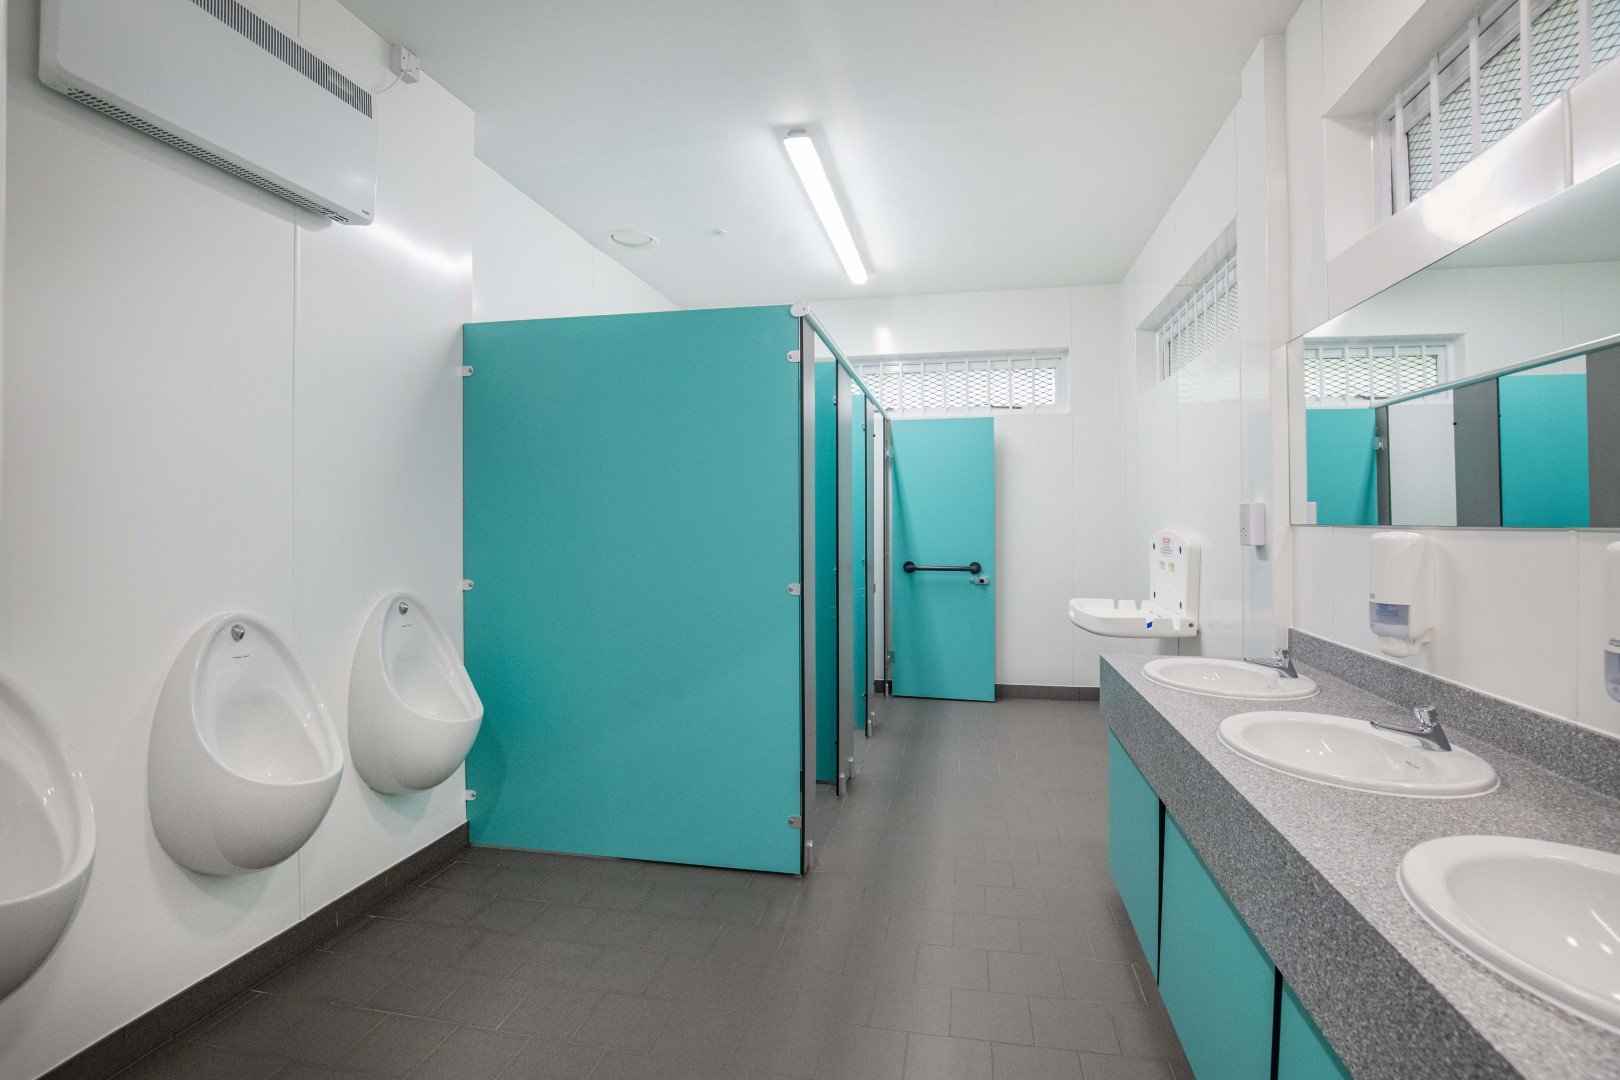 washroom with urinals, toilet cubicles, vanity with solid surface top at riverside campsite.jpg